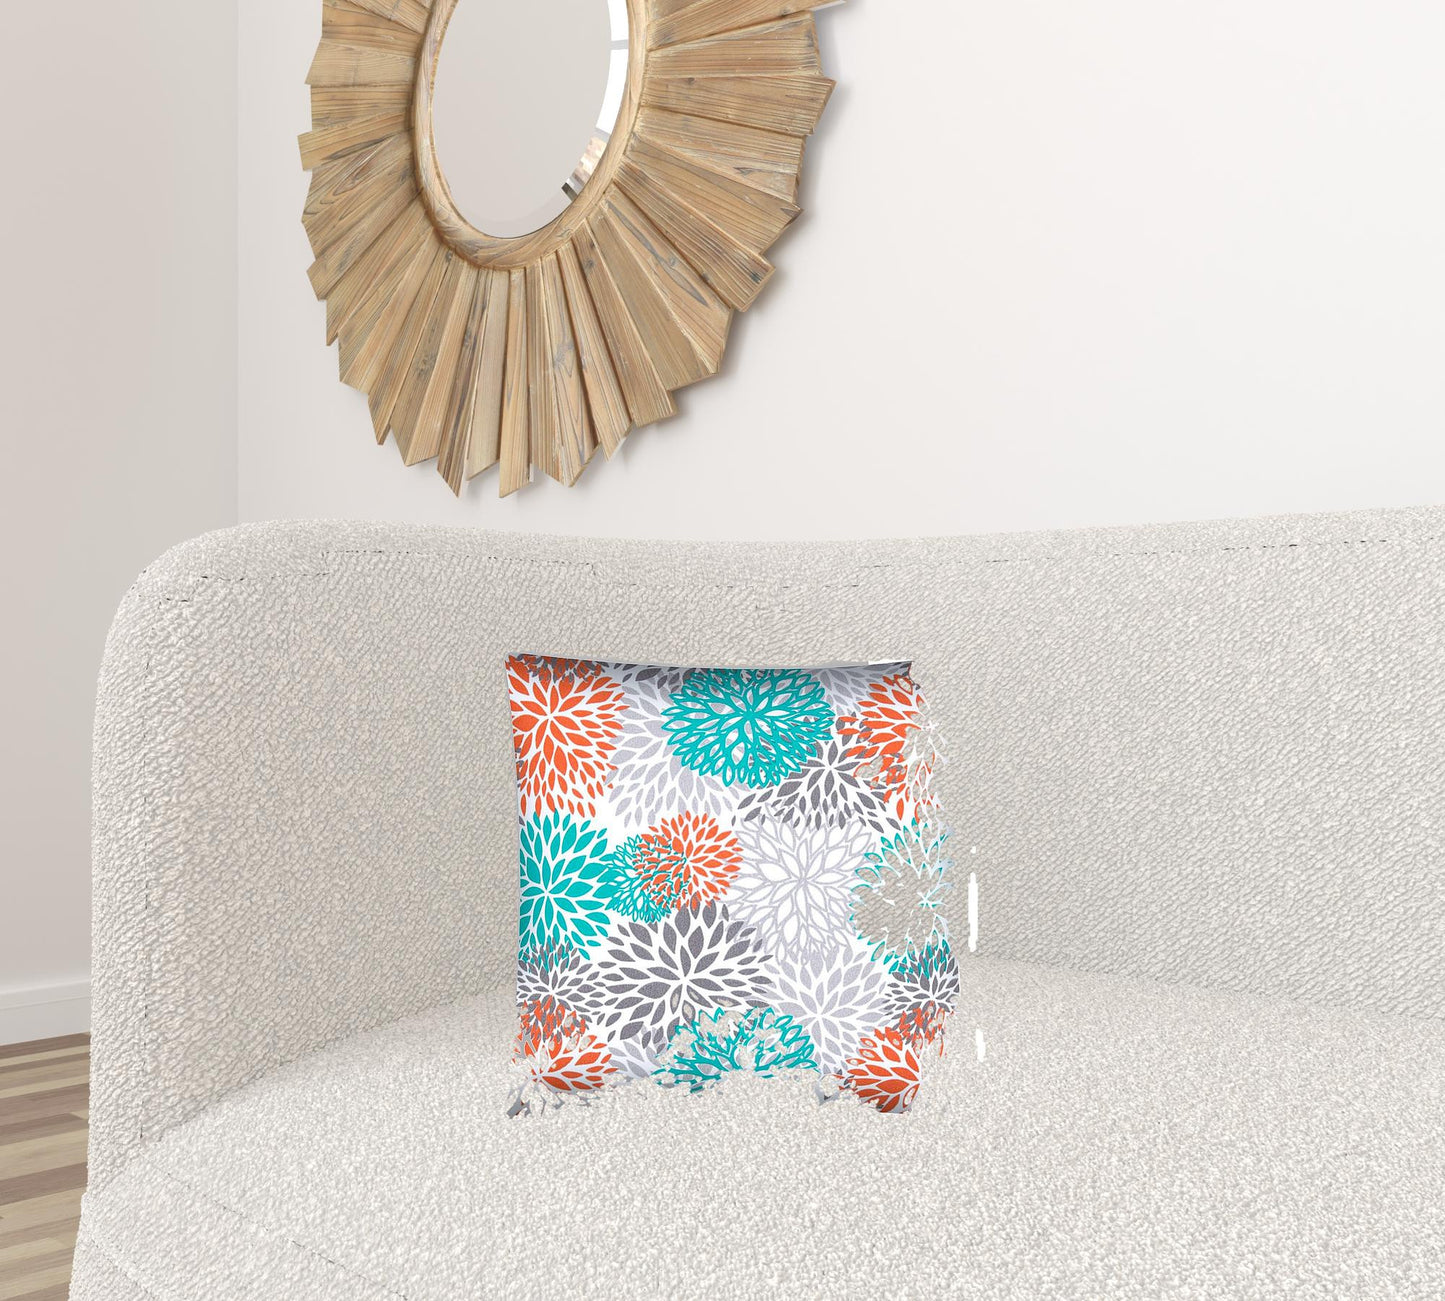 17" X 17" Orange And White Zippered Floral Throw Indoor Outdoor Pillow